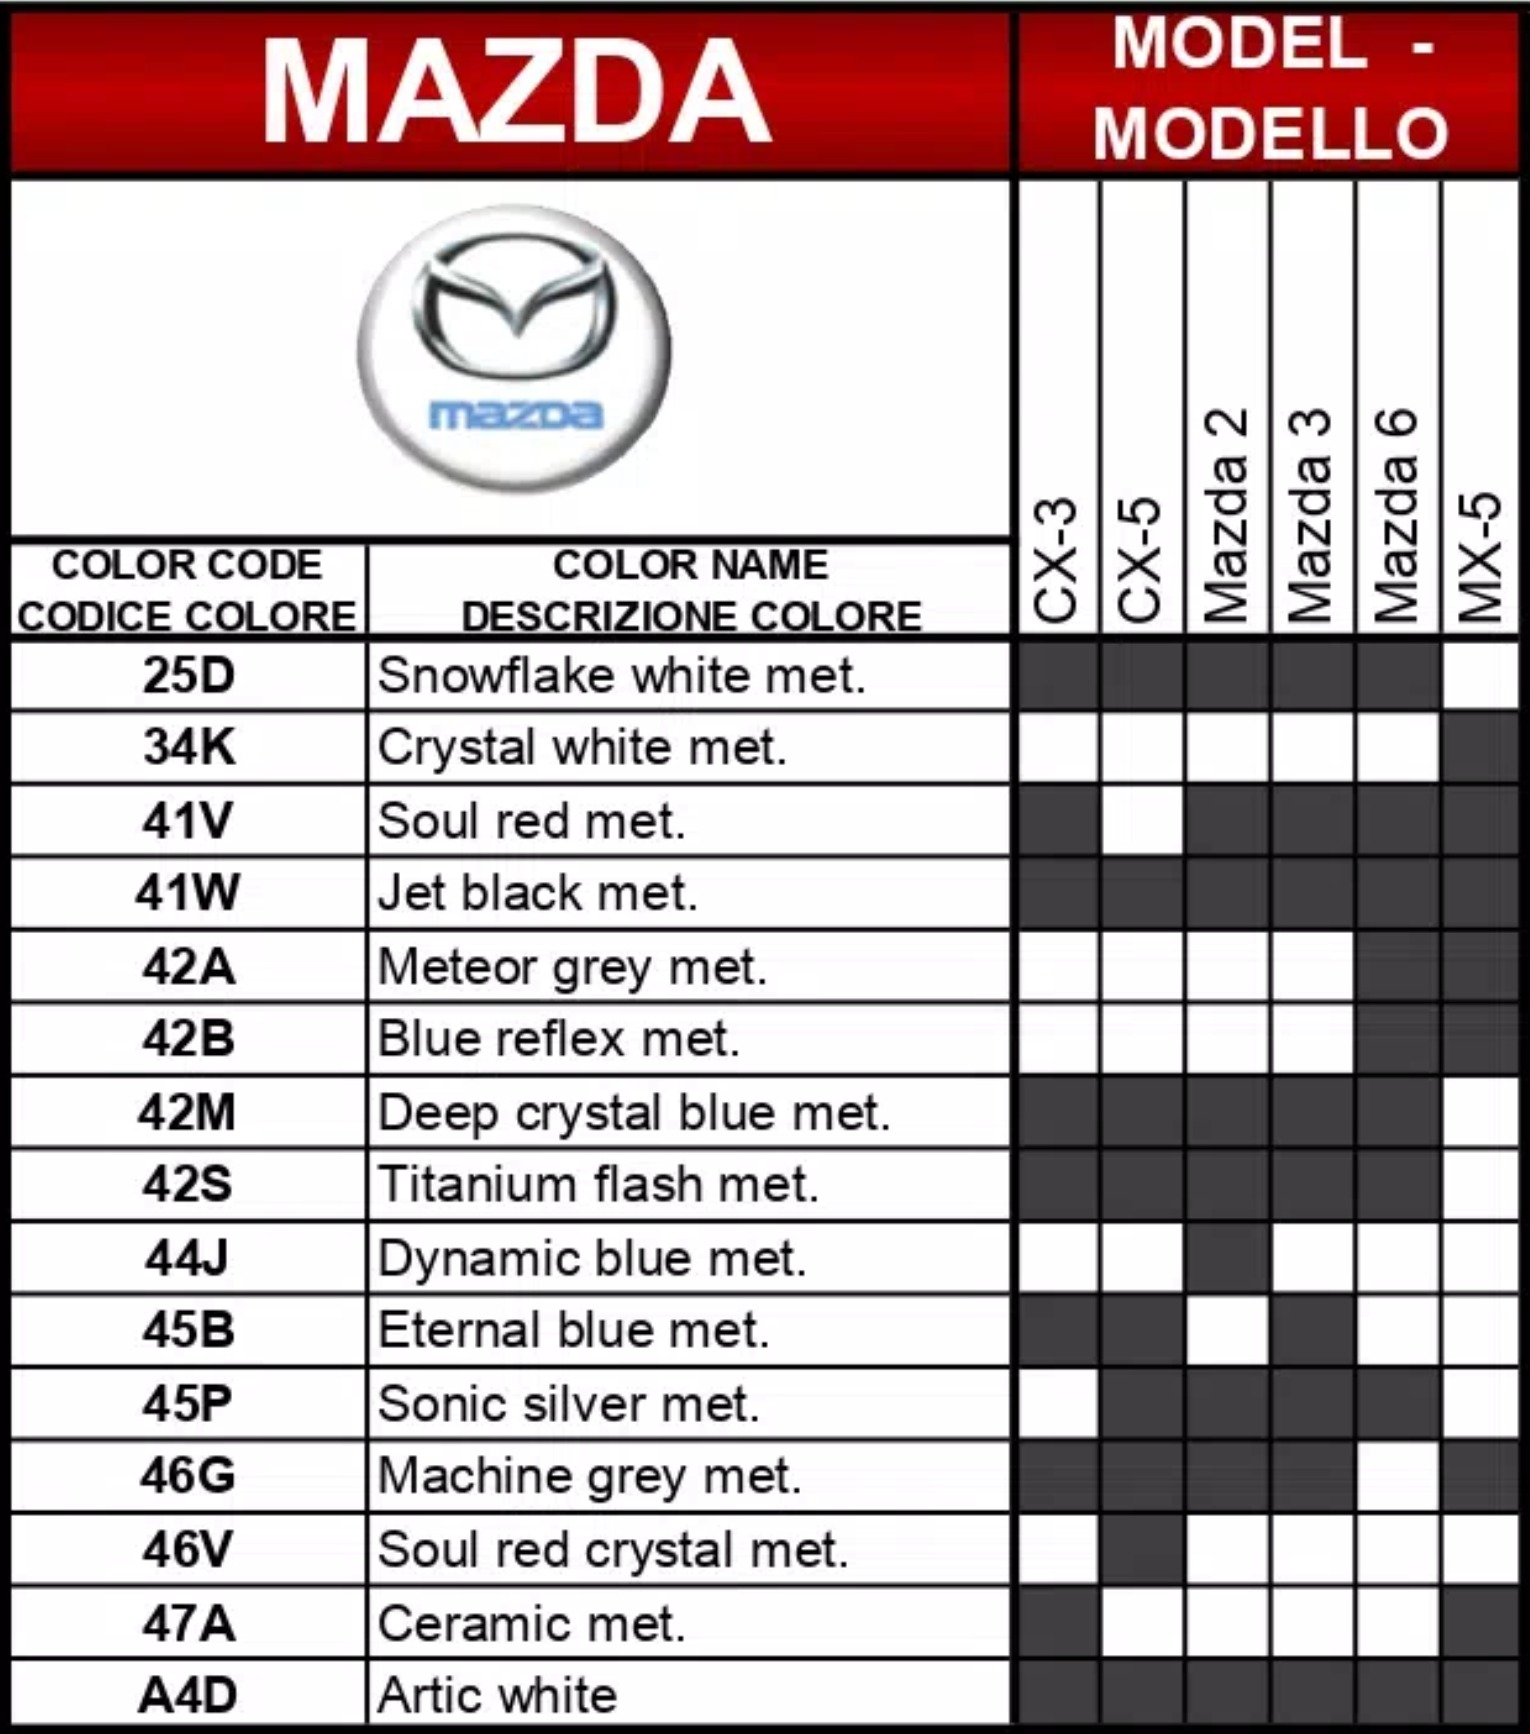 A chart showing what paint codes and their color names go to which vehicle for Mazda automobiles in 2018